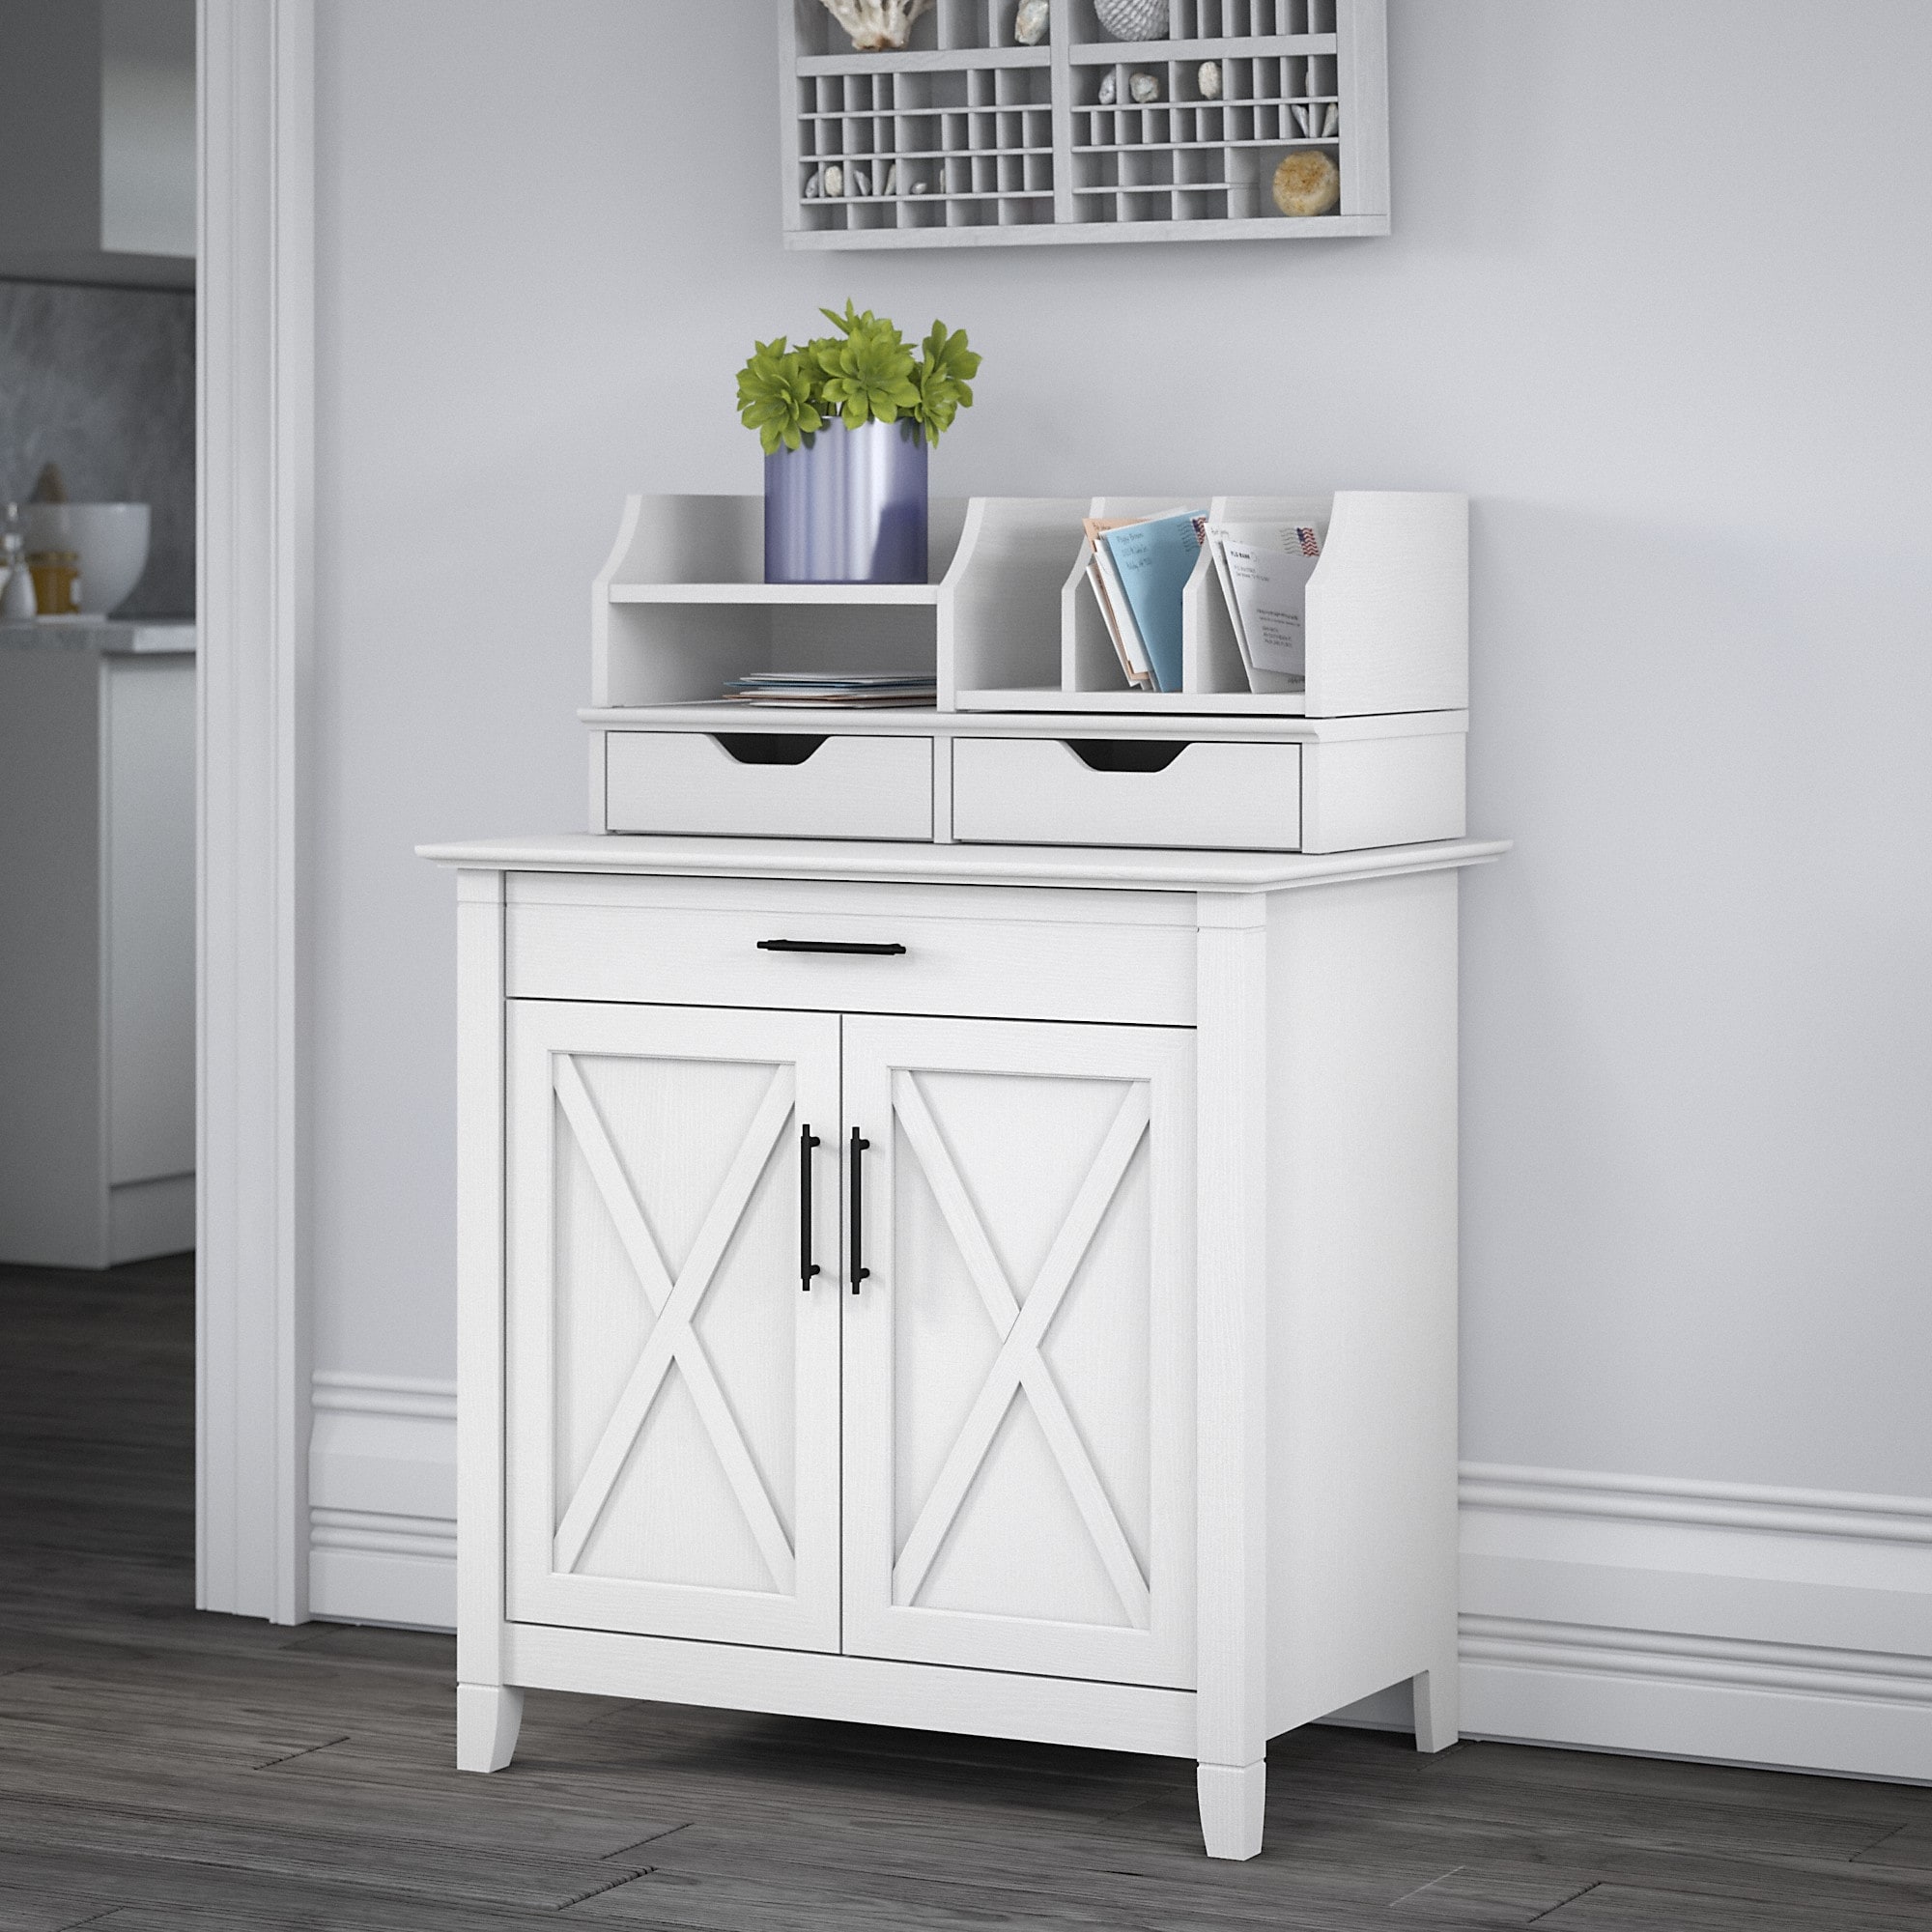 https://ak1.ostkcdn.com/images/products/is/images/direct/8d8d201712644d2c2ff11eda4d1ffd0f7dd4c11b/The-Gray-Barn-Hatfield-Secretary-Desk-with-Storage-Cabinet.jpg